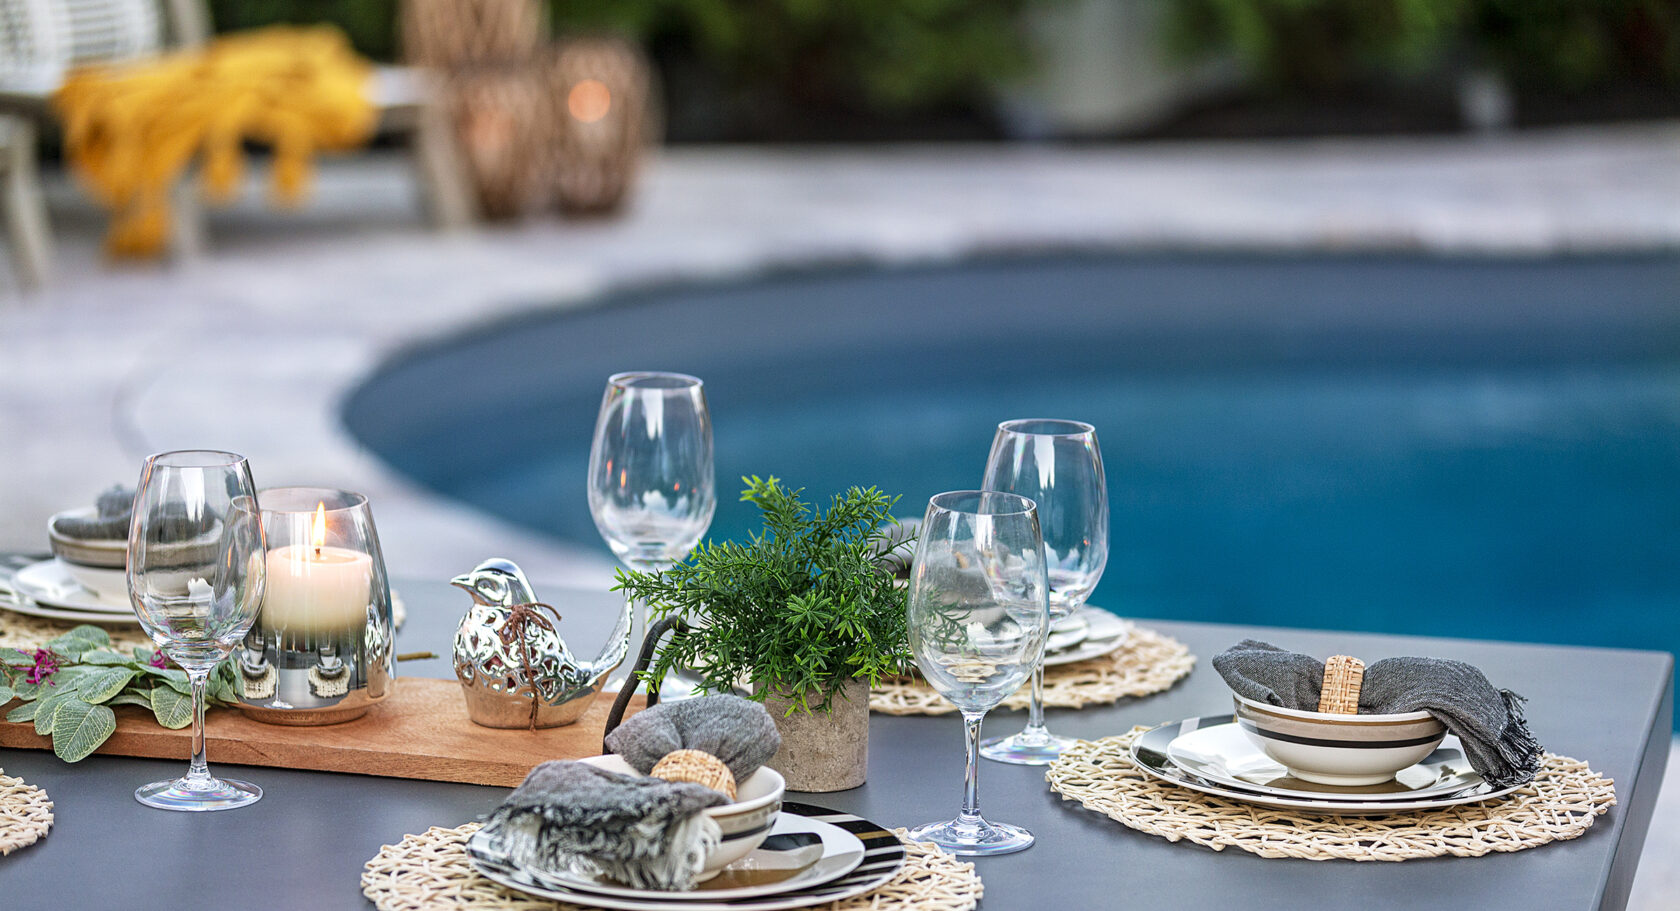 Place settings on a poolside dining table. Dex by Terra landscape design and build project in Shrewsbury MA.